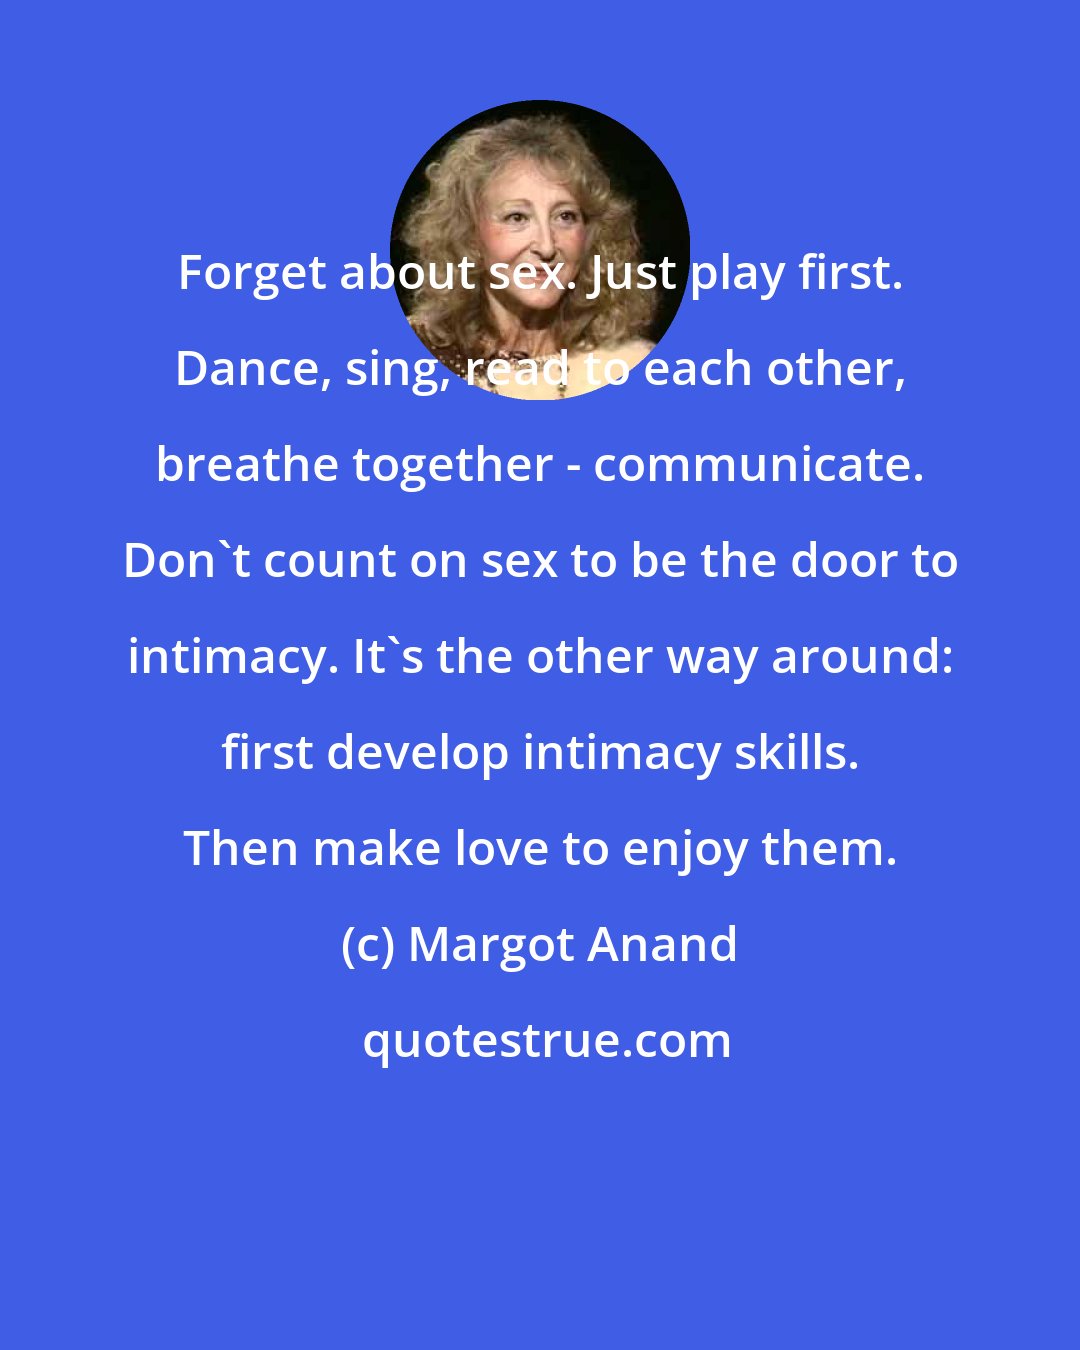 Margot Anand: Forget about sex. Just play first. Dance, sing, read to each other, breathe together - communicate. Don't count on sex to be the door to intimacy. It's the other way around: first develop intimacy skills. Then make love to enjoy them.